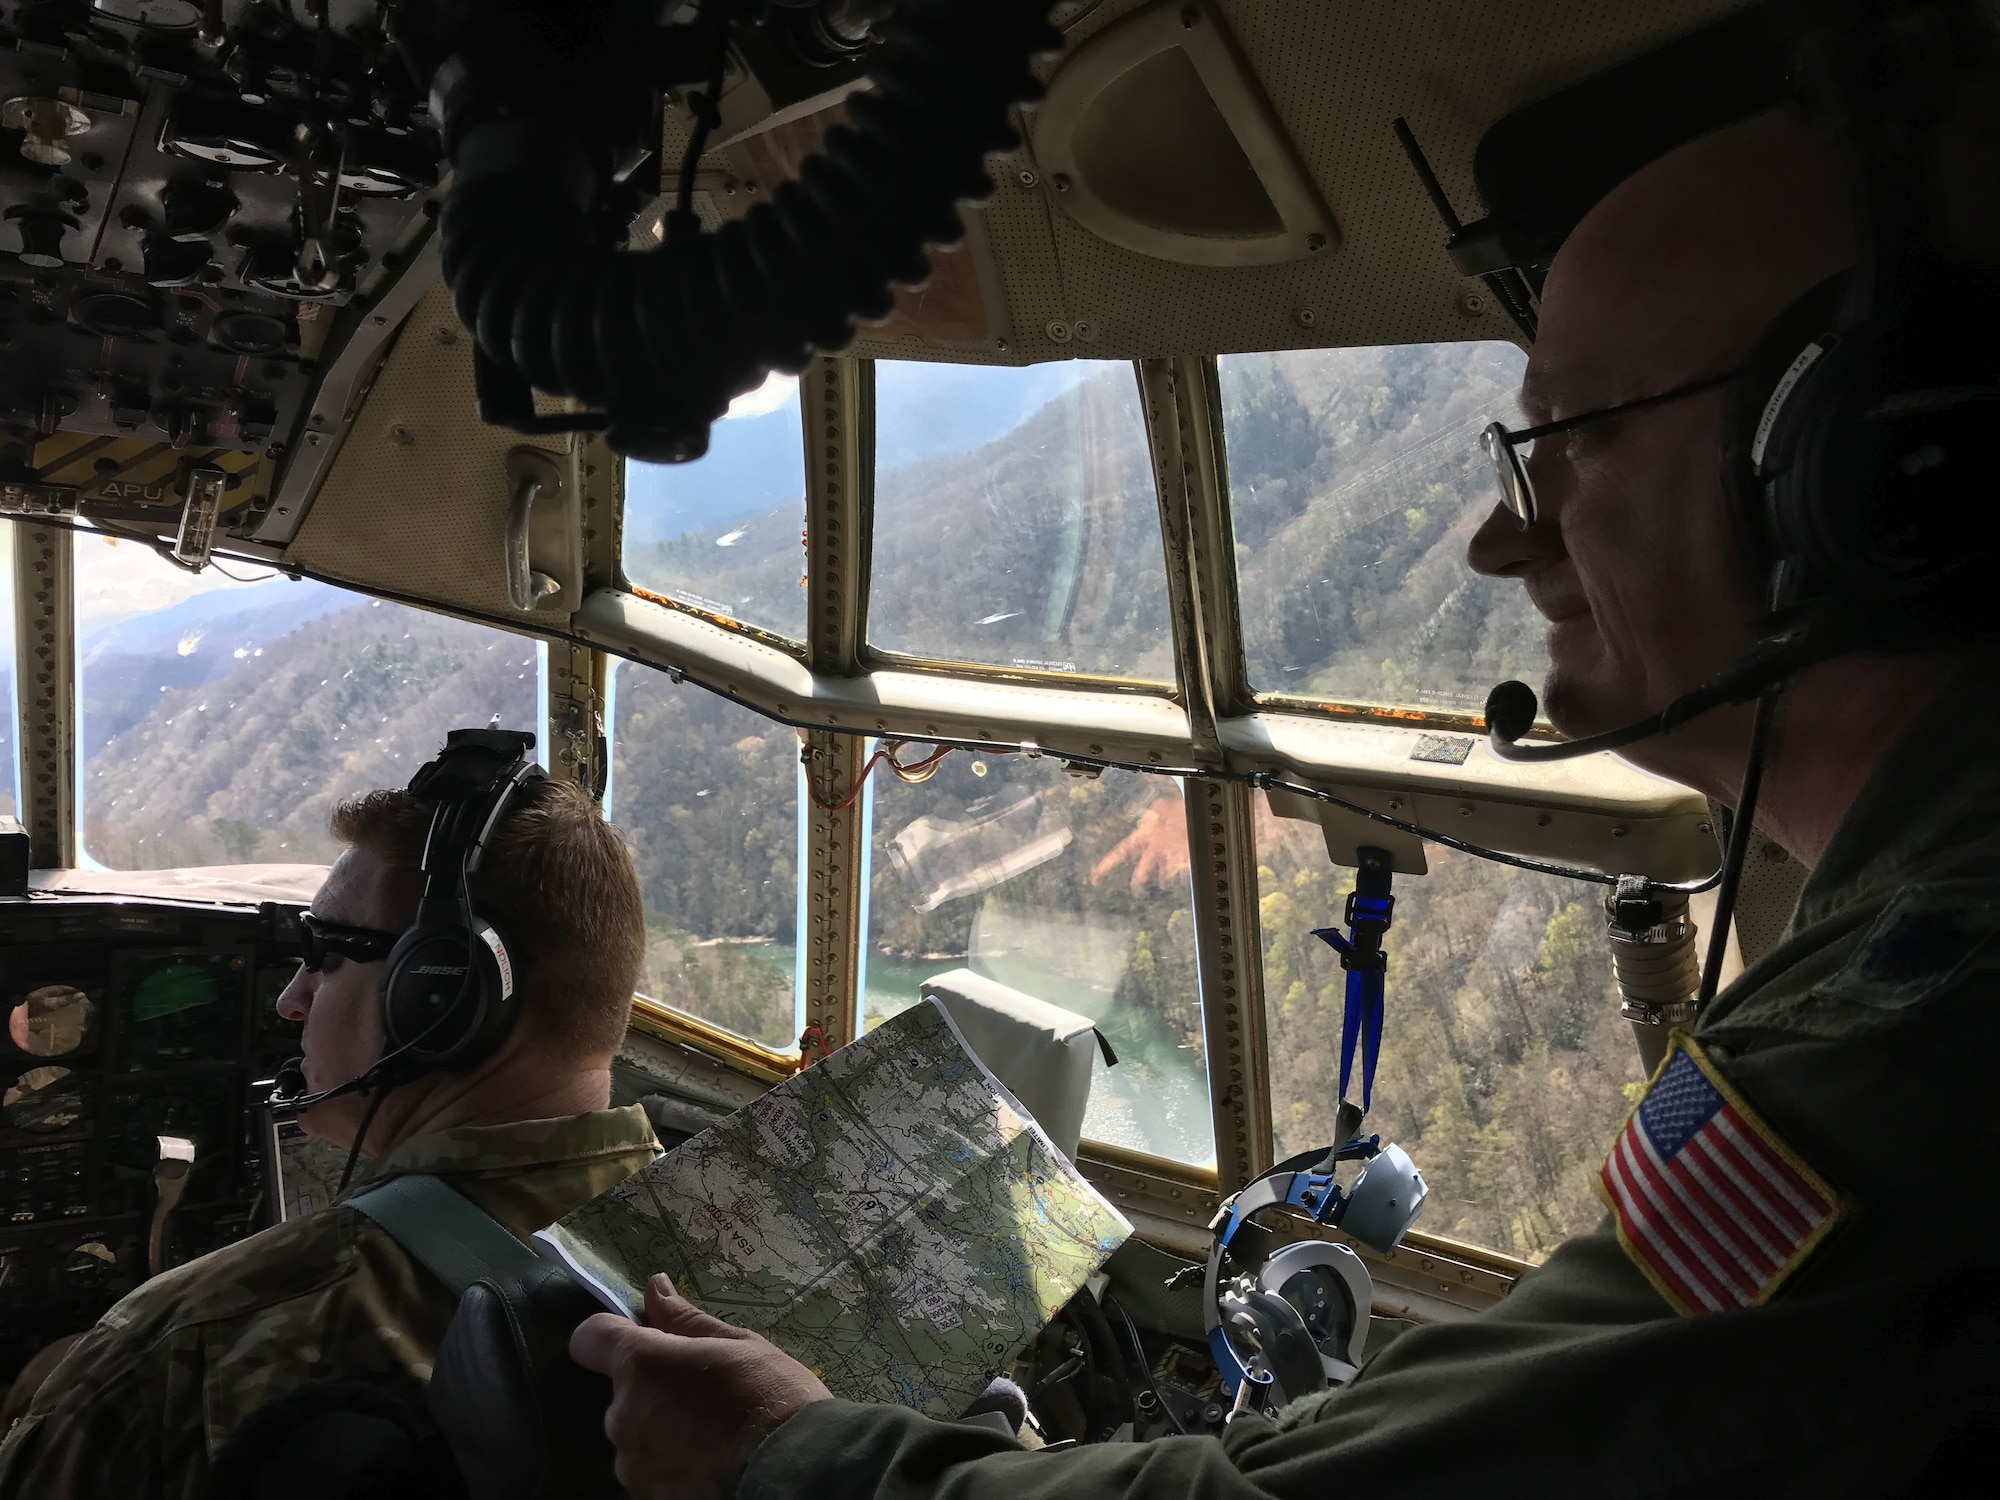 Lt. Col. Barry “JR” Cupples, a navigator with the 757th Airlift Squadron, looks through the flight deck windows of a C-130H Hercules aircraft during the flight in which he completed his ten thousandth C-130 flight hour, April 6, 2019.